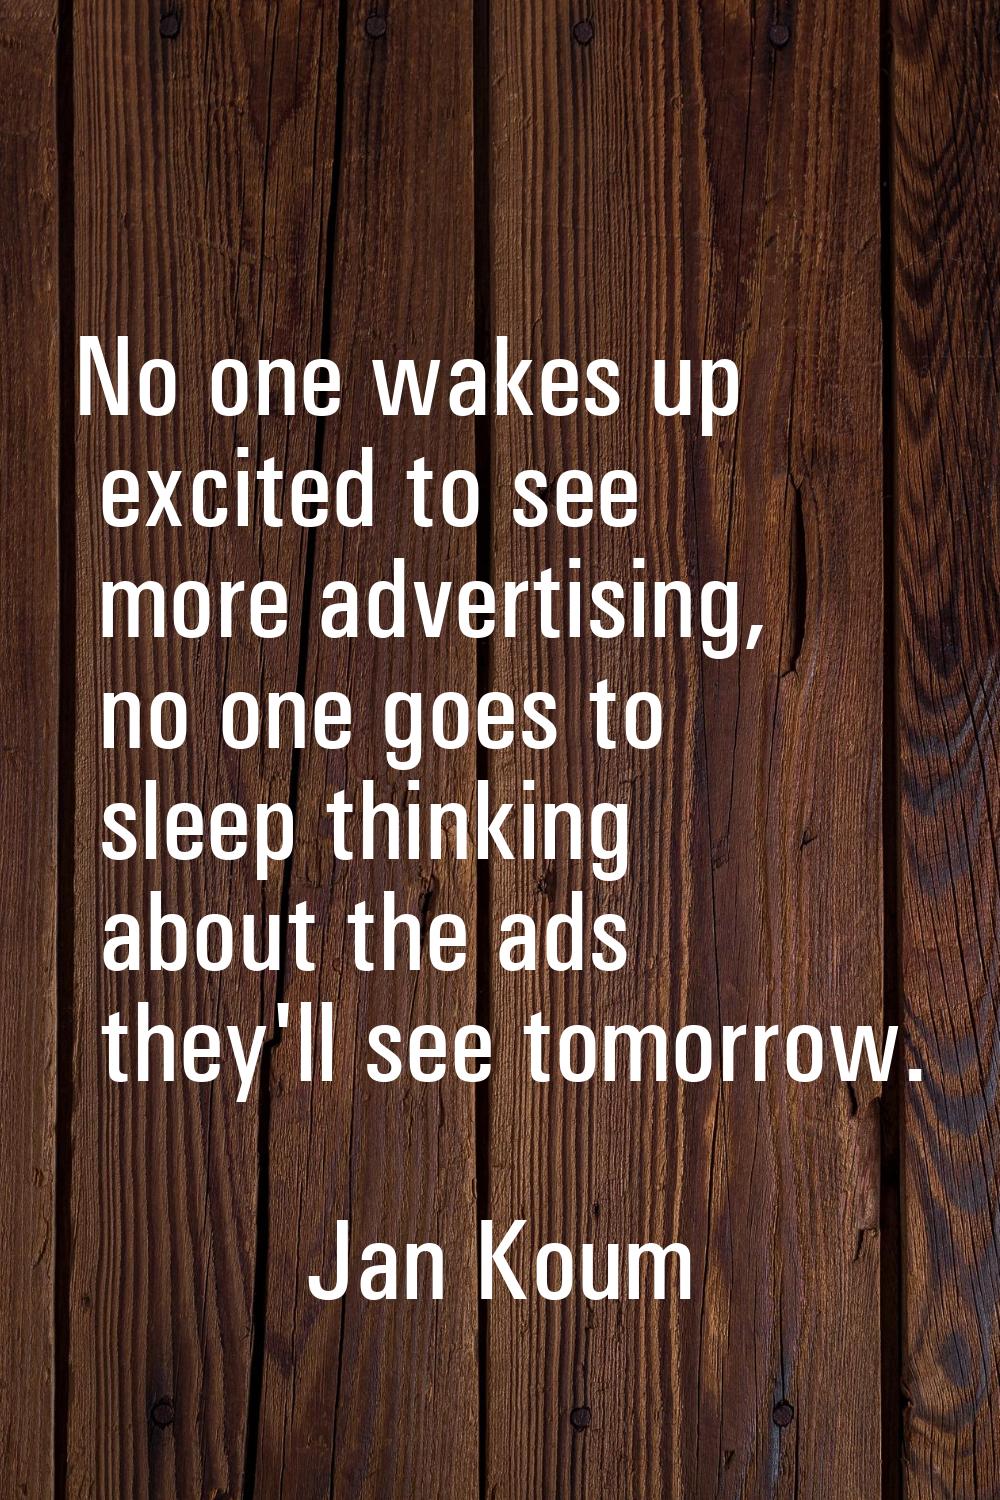 No one wakes up excited to see more advertising, no one goes to sleep thinking about the ads they'l